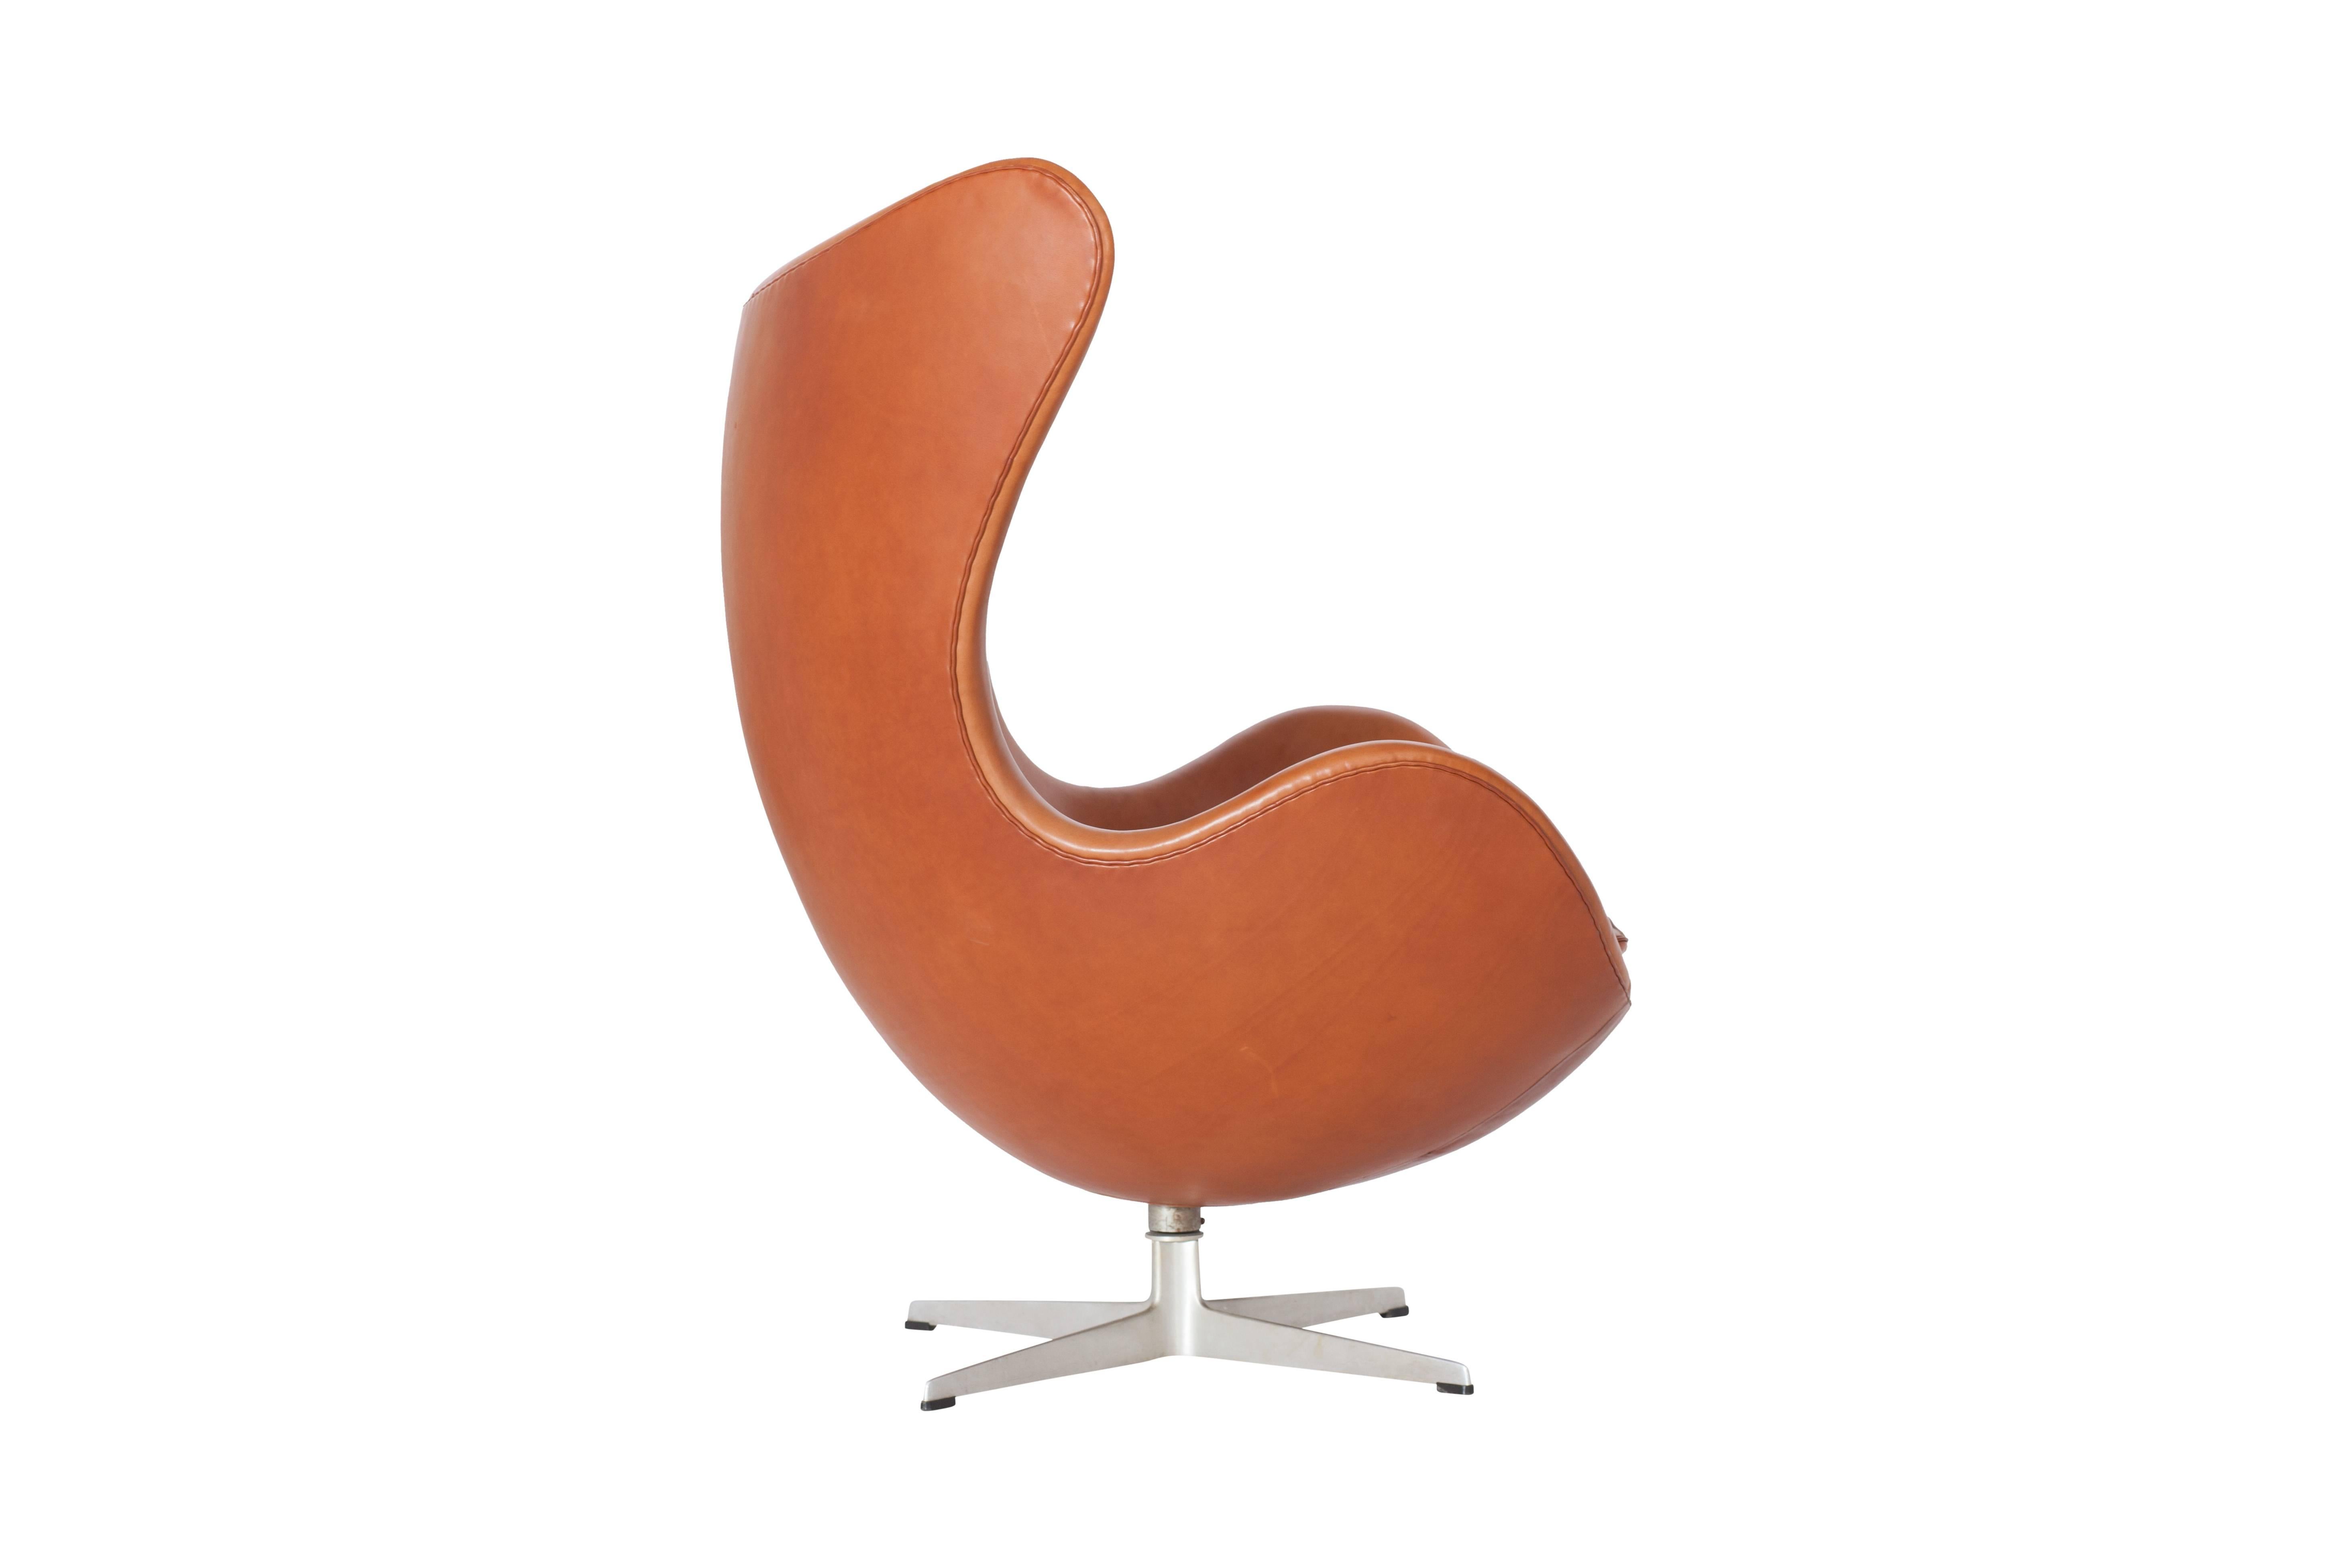 Mid-Century Modern Egg Chair in Cognac Leather by Arne Jacobsen